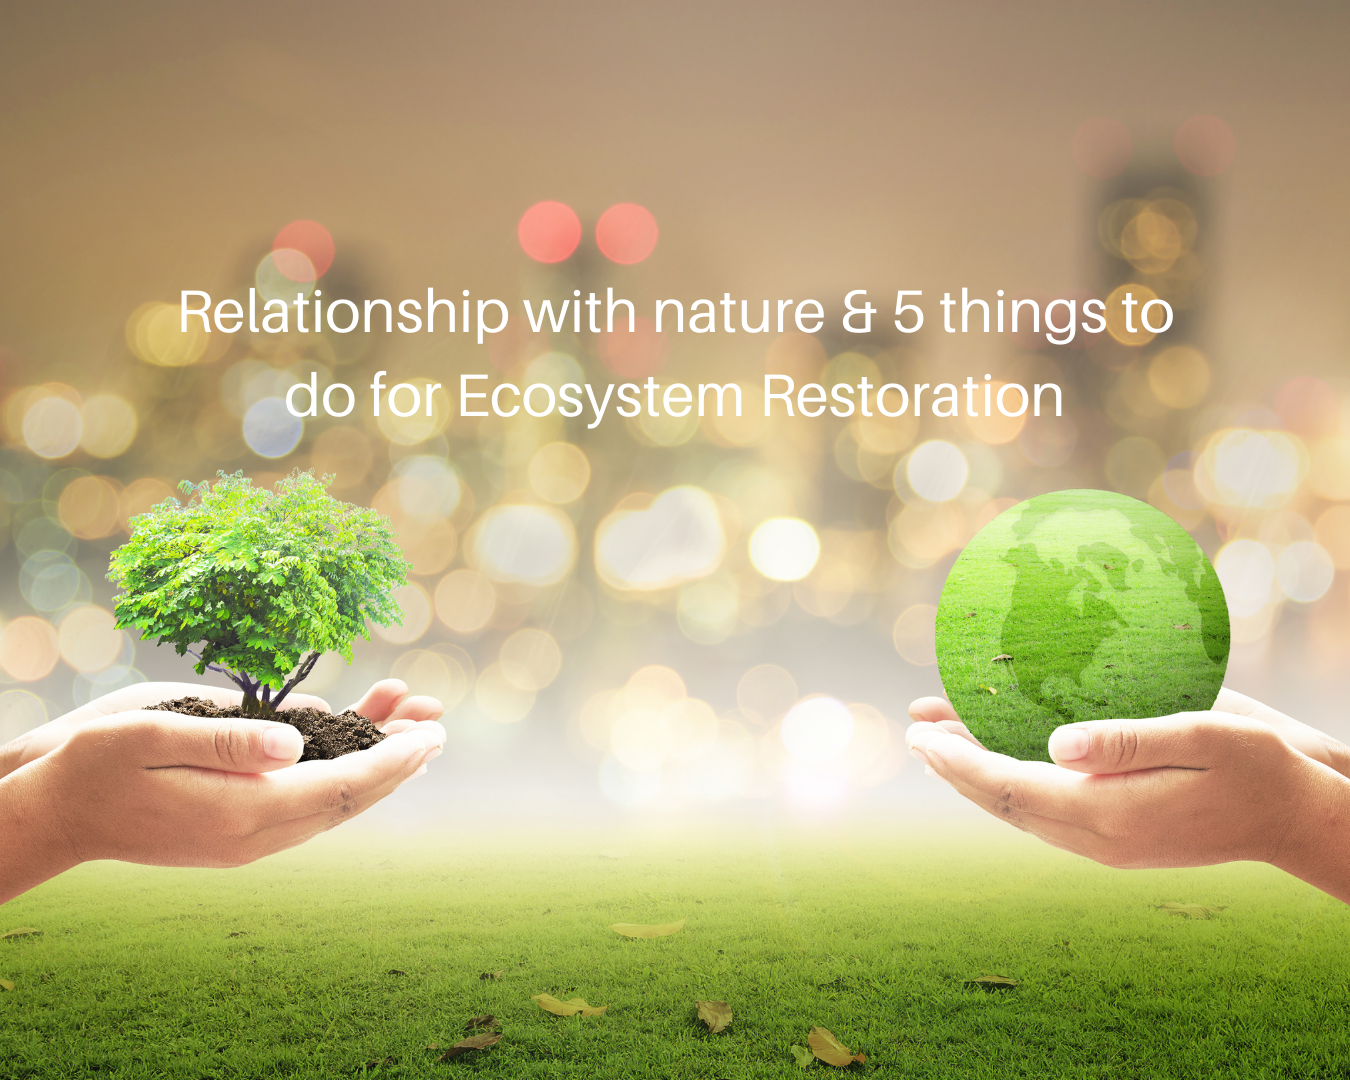 World Environment Day - Relationship with nature & 5 things you can do for Ecosystem Restoration